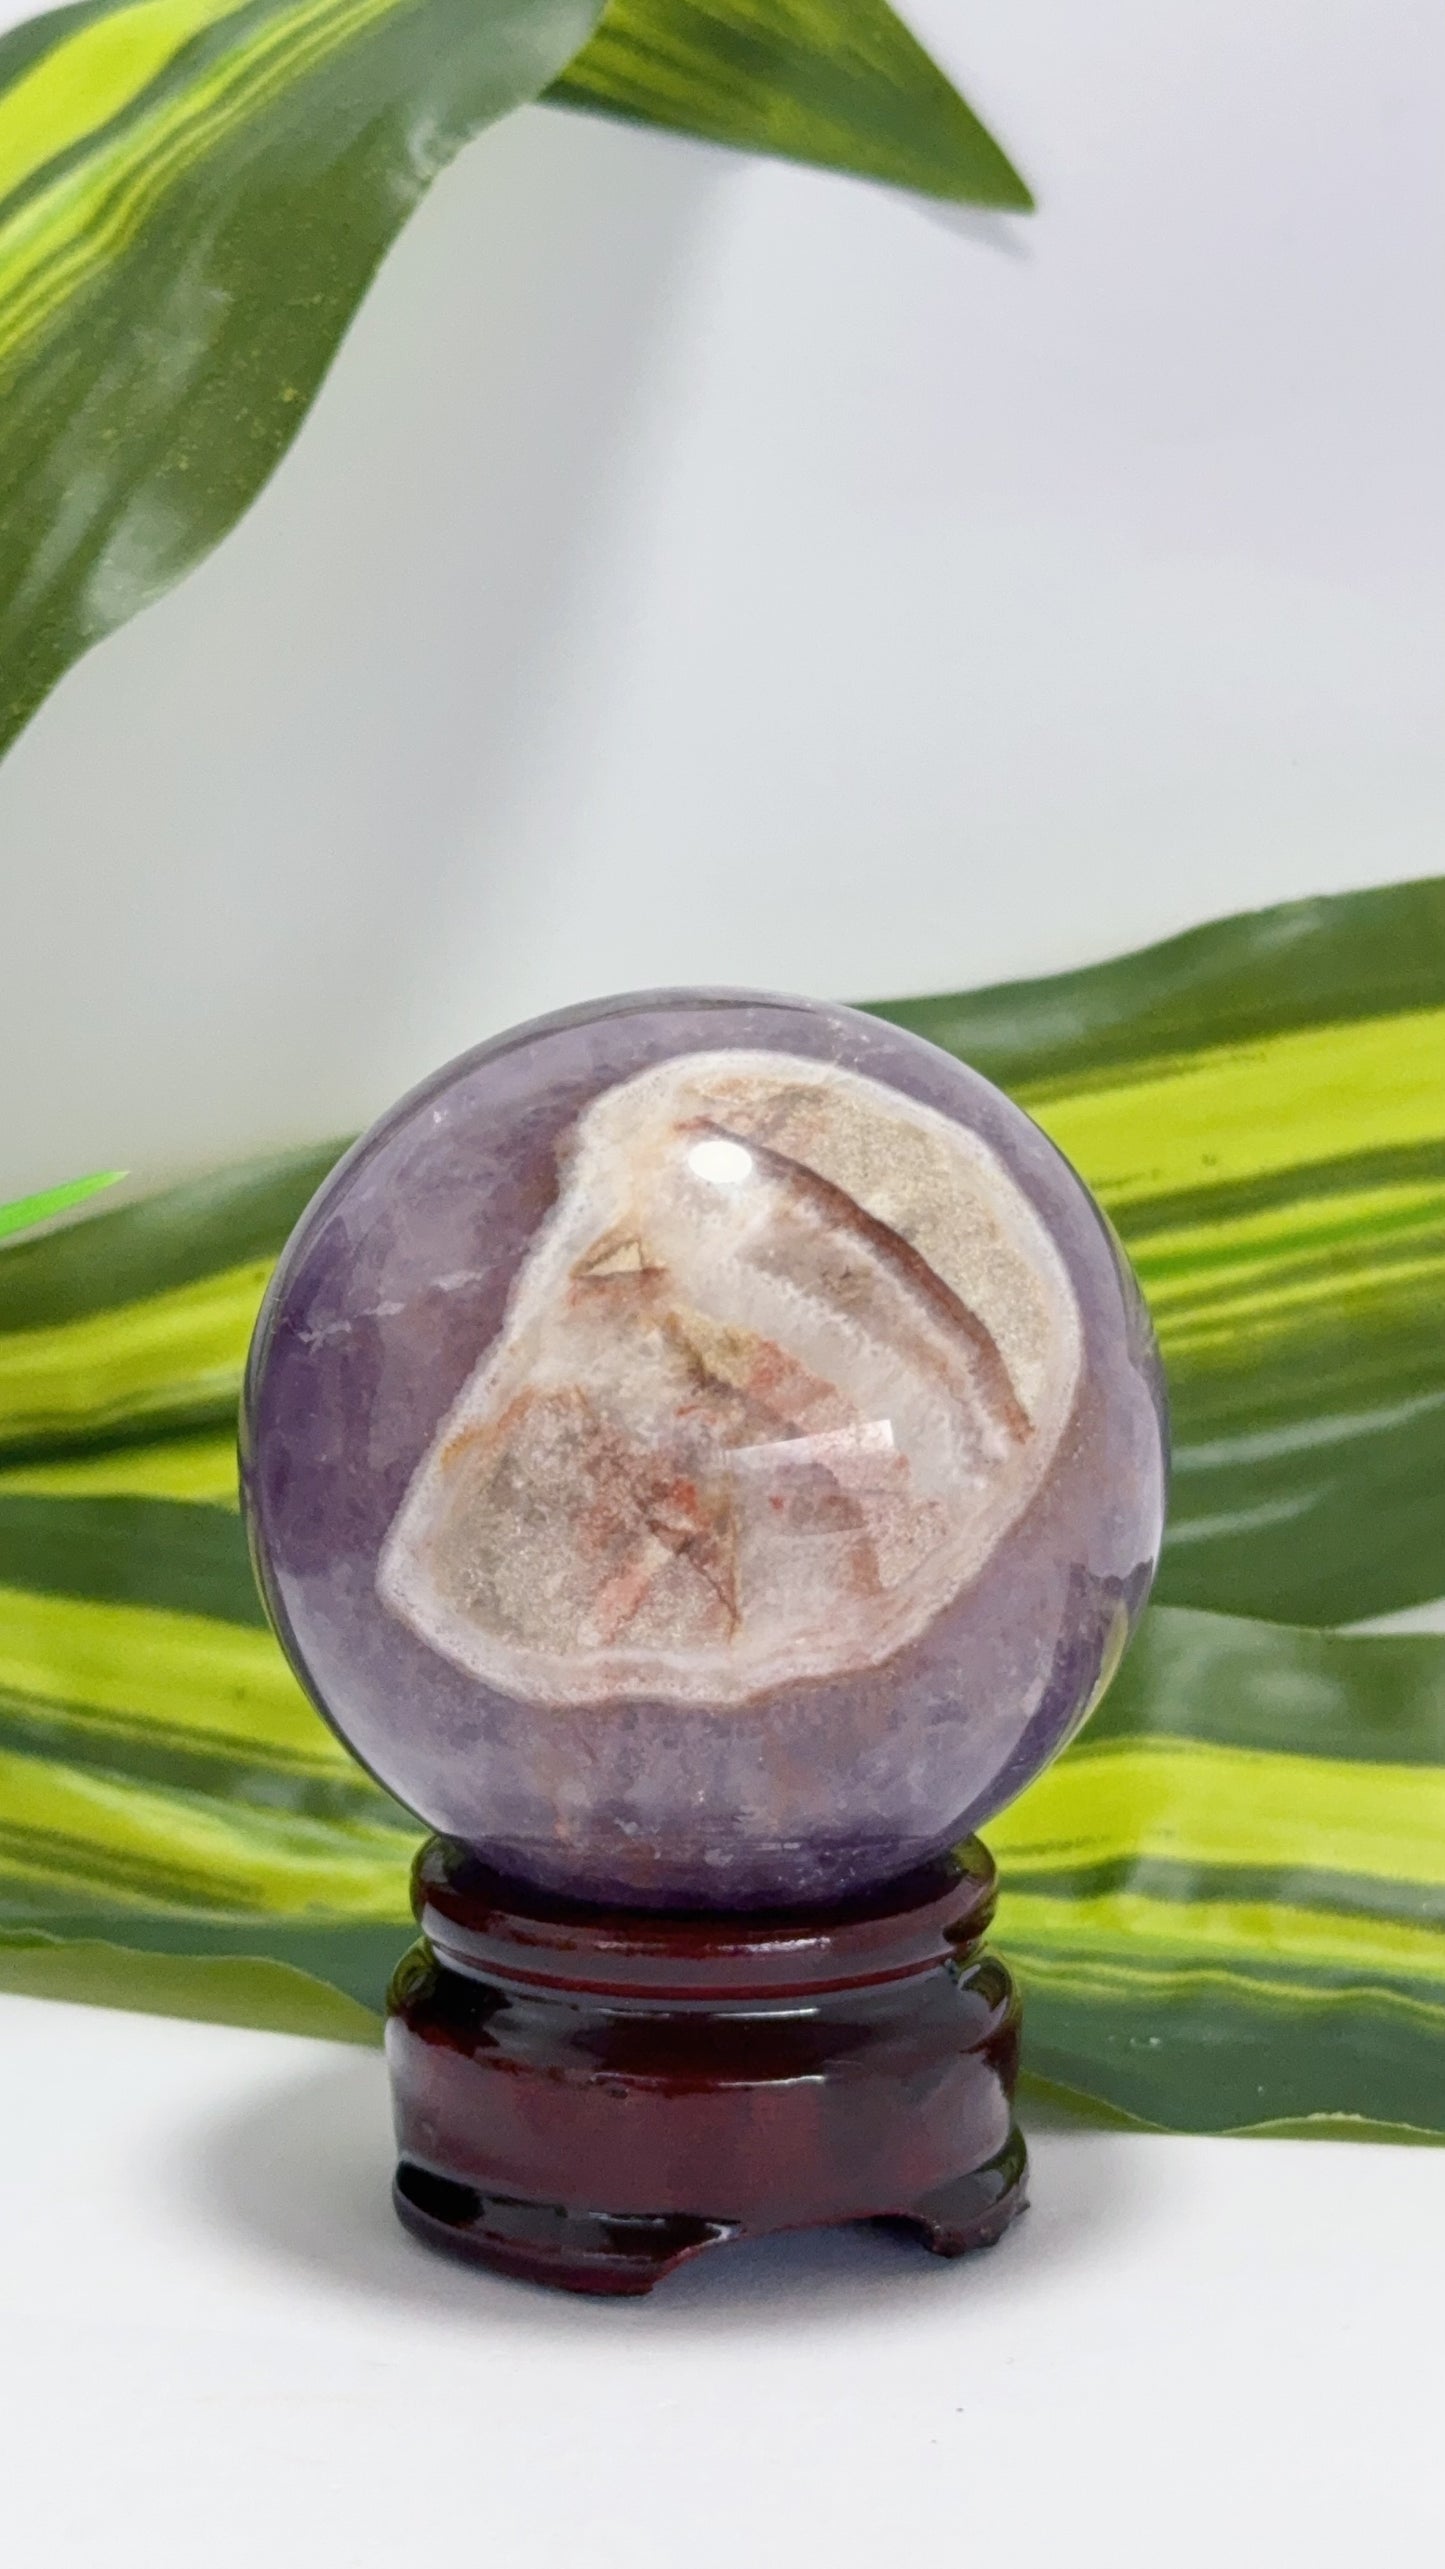 Amethyst and Mexican Agate Sphere 264g